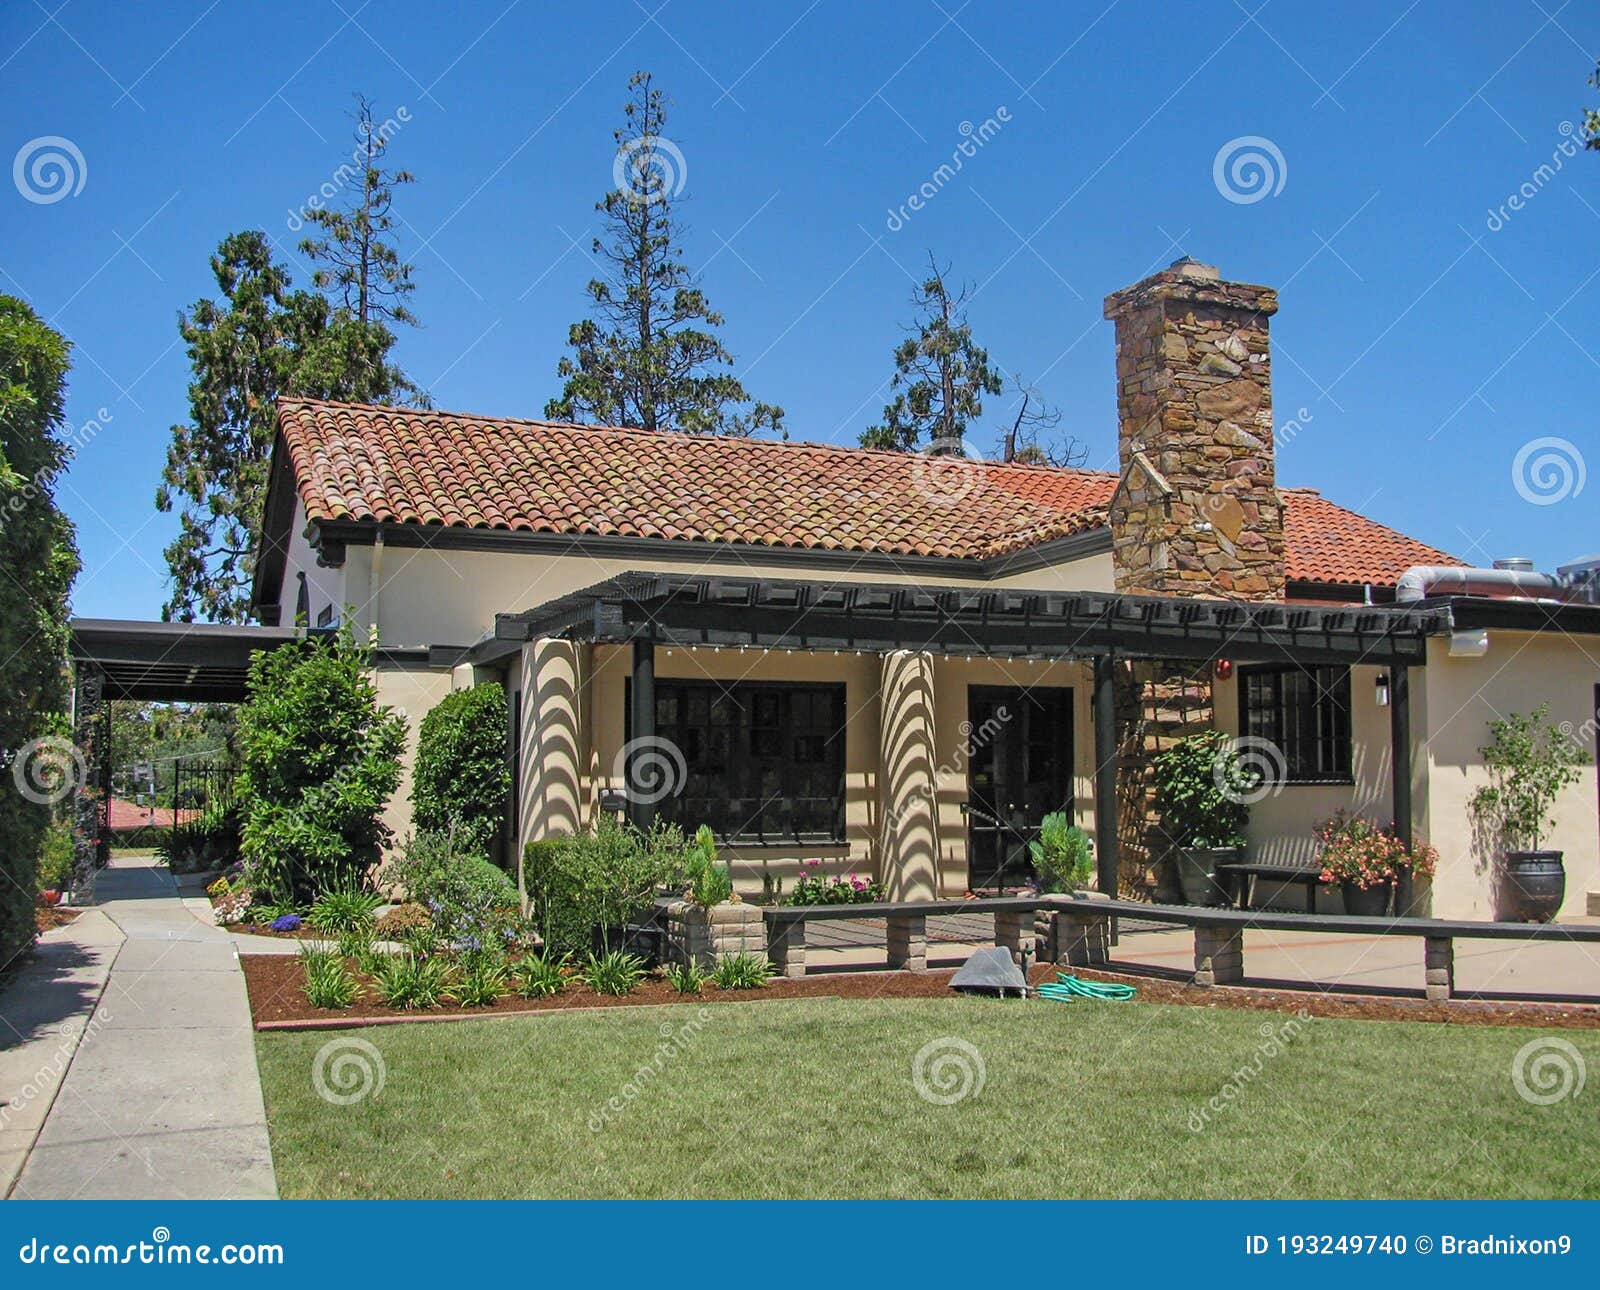 The Monday Club Building by Julia Morgan in Arts and Crafts Style, San Luis  Obispo, California Editorial Image - Image of building, monday: 193249740